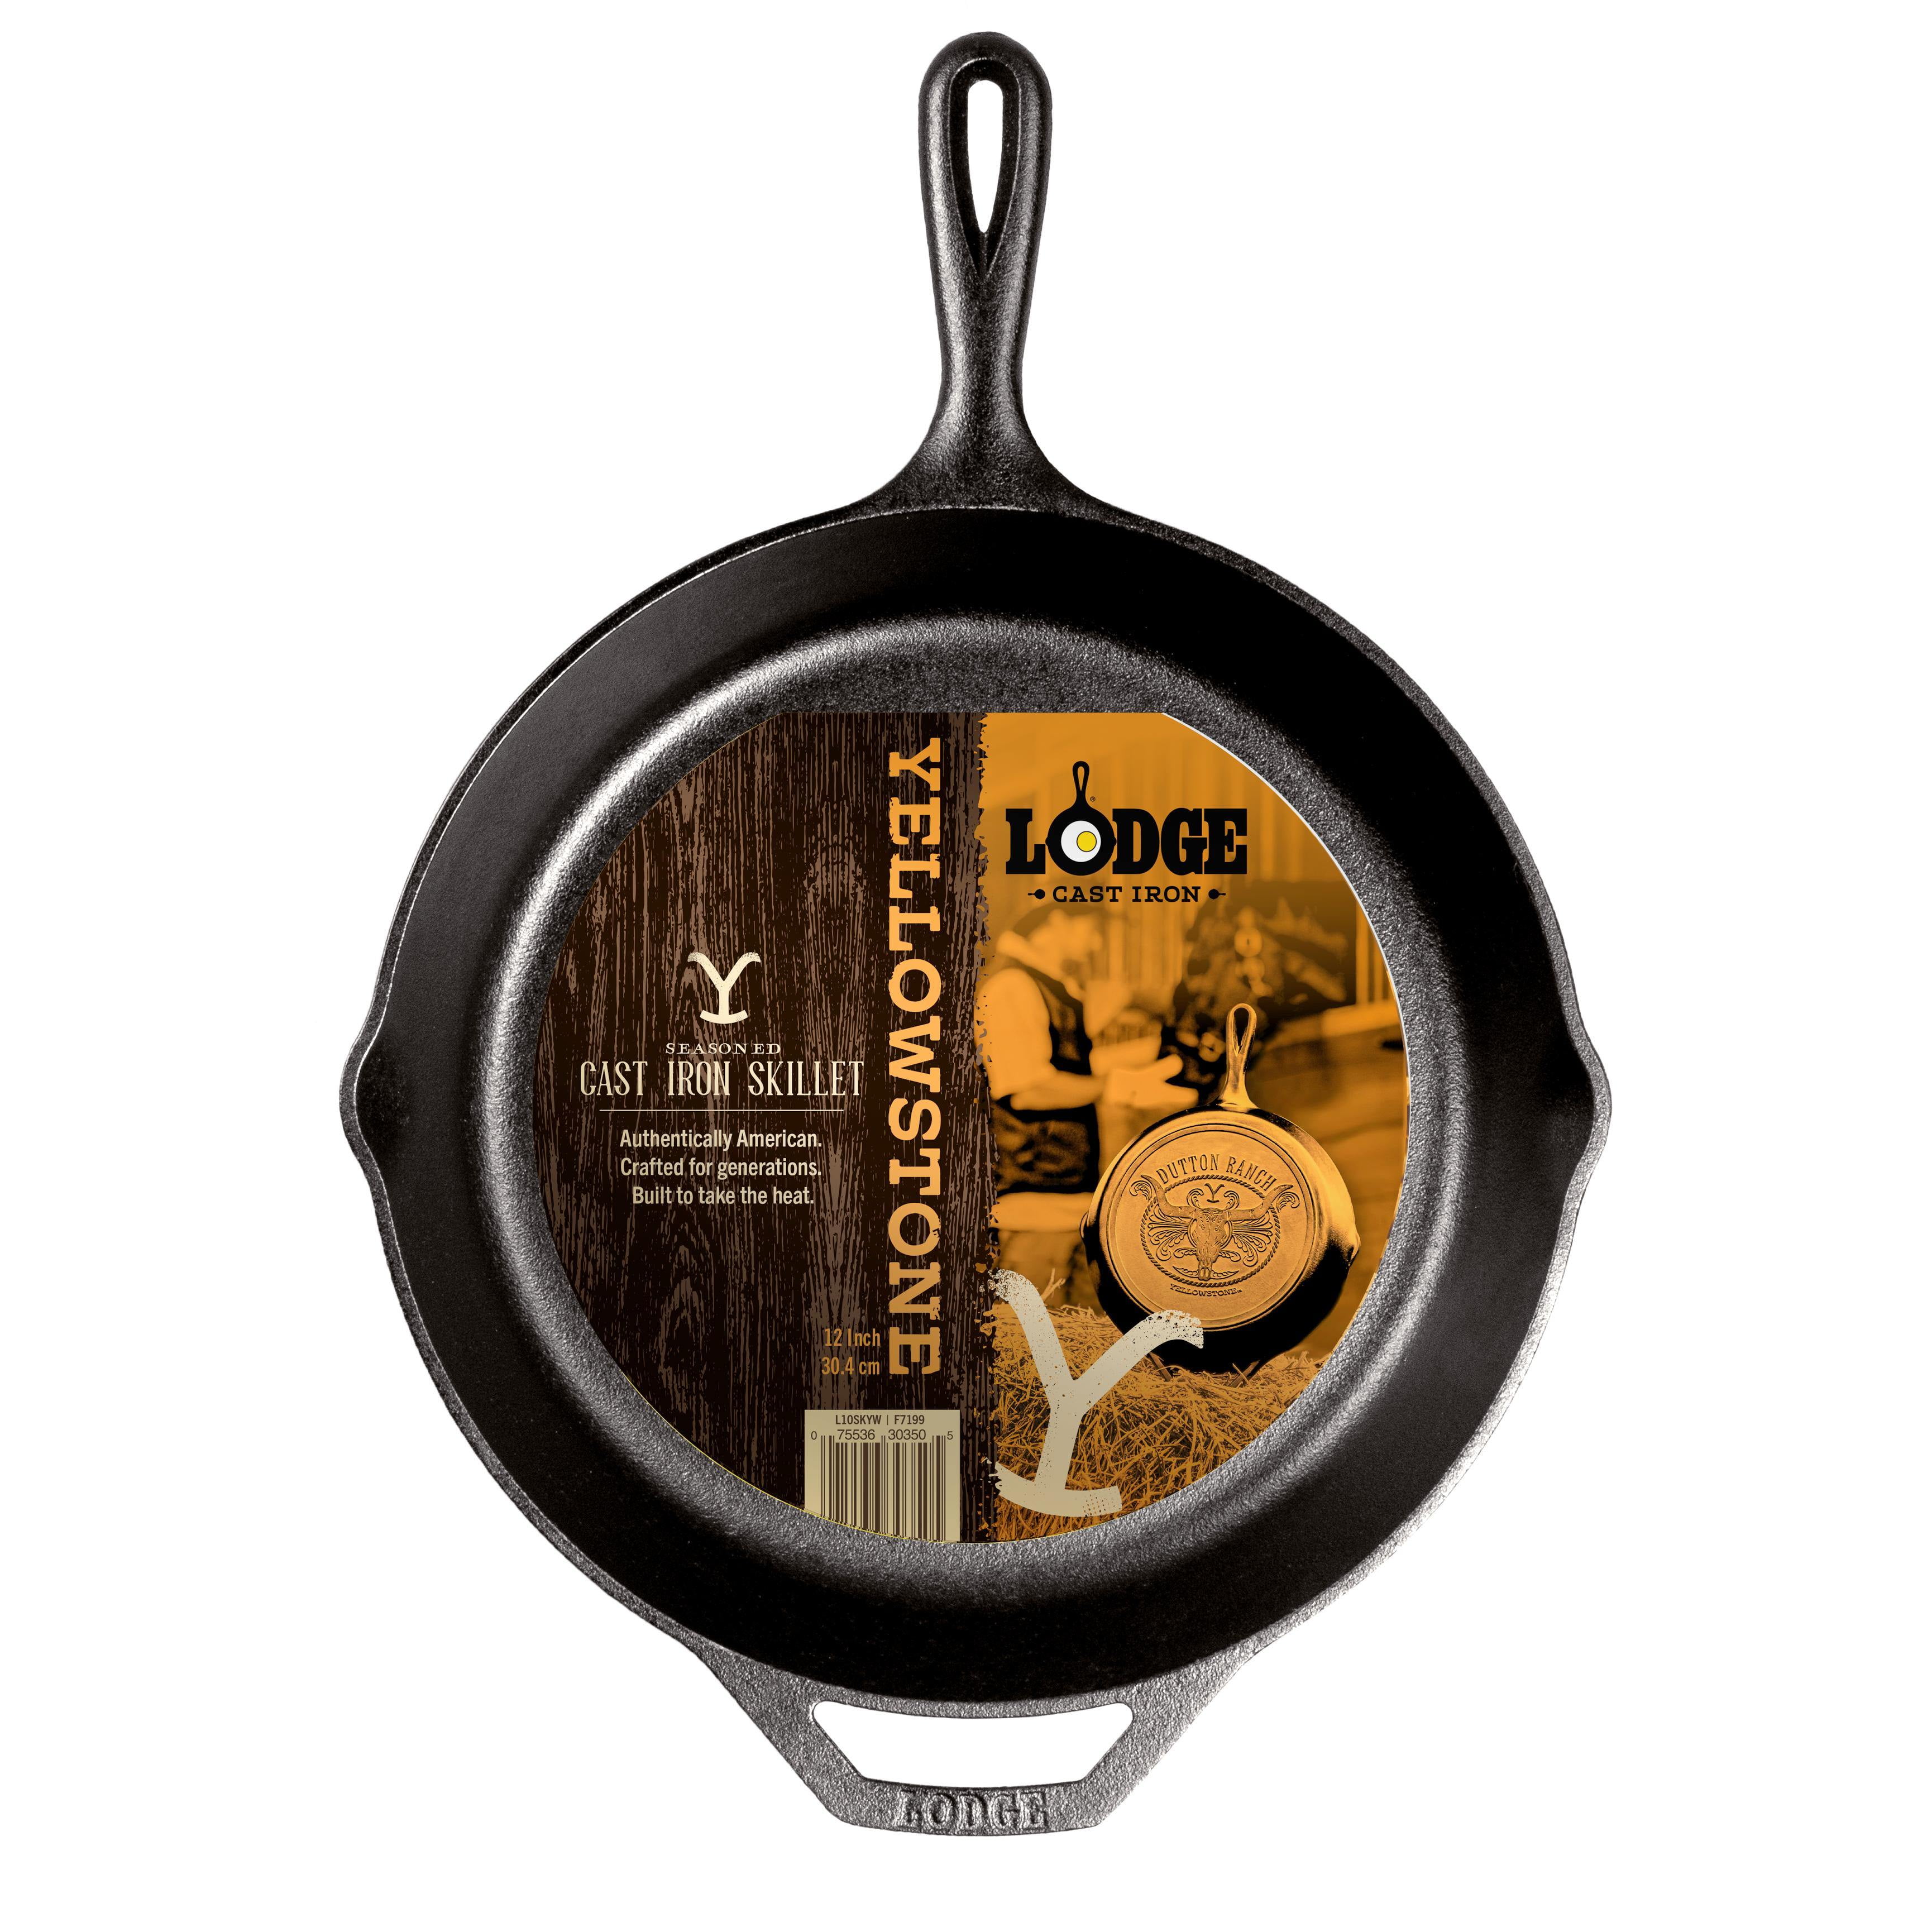 Lodge 12 Cast Iron Skillet (each) Delivery or Pickup Near Me